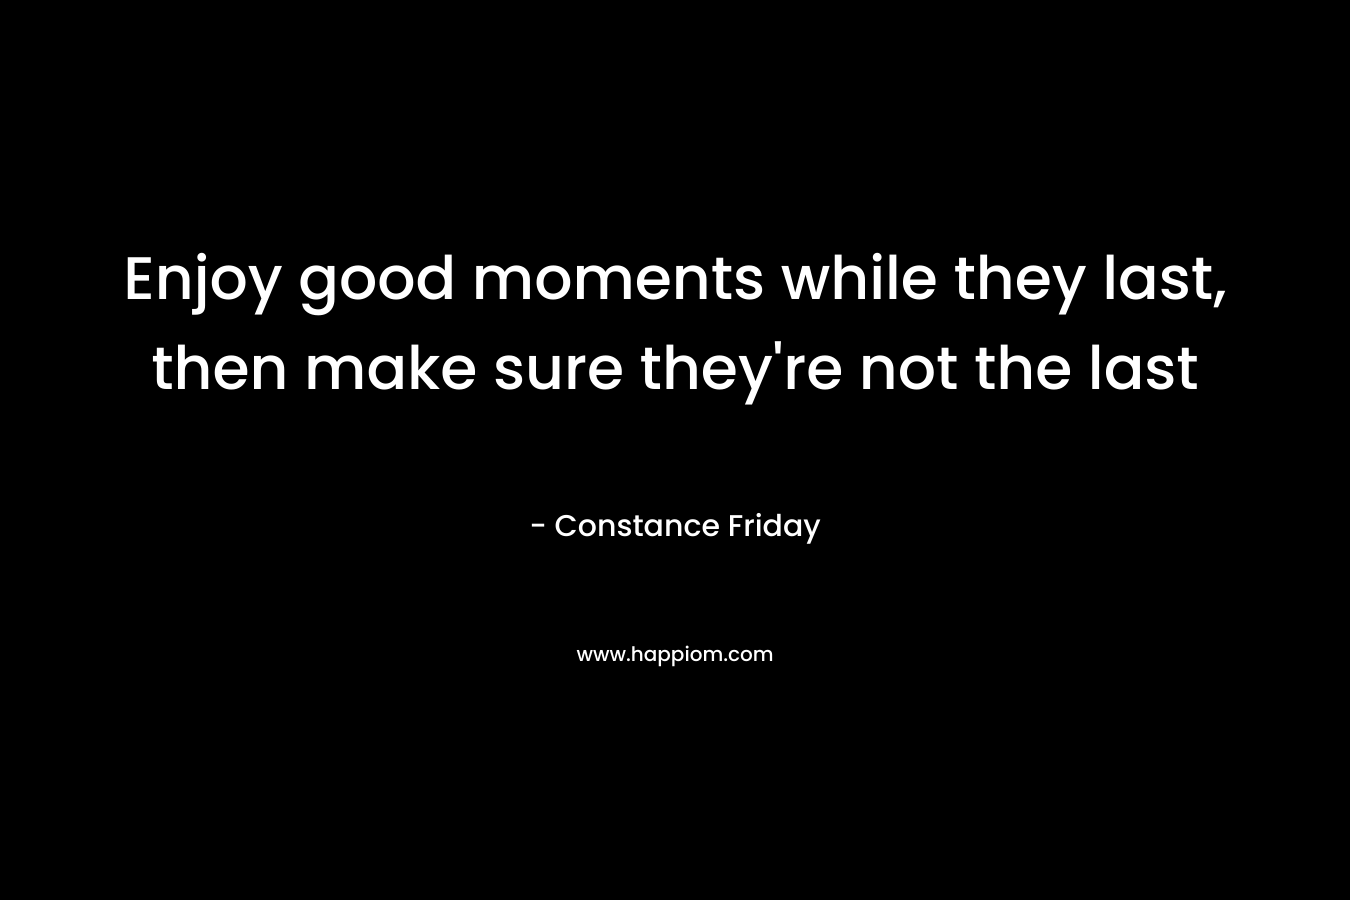 Enjoy good moments while they last, then make sure they're not the last